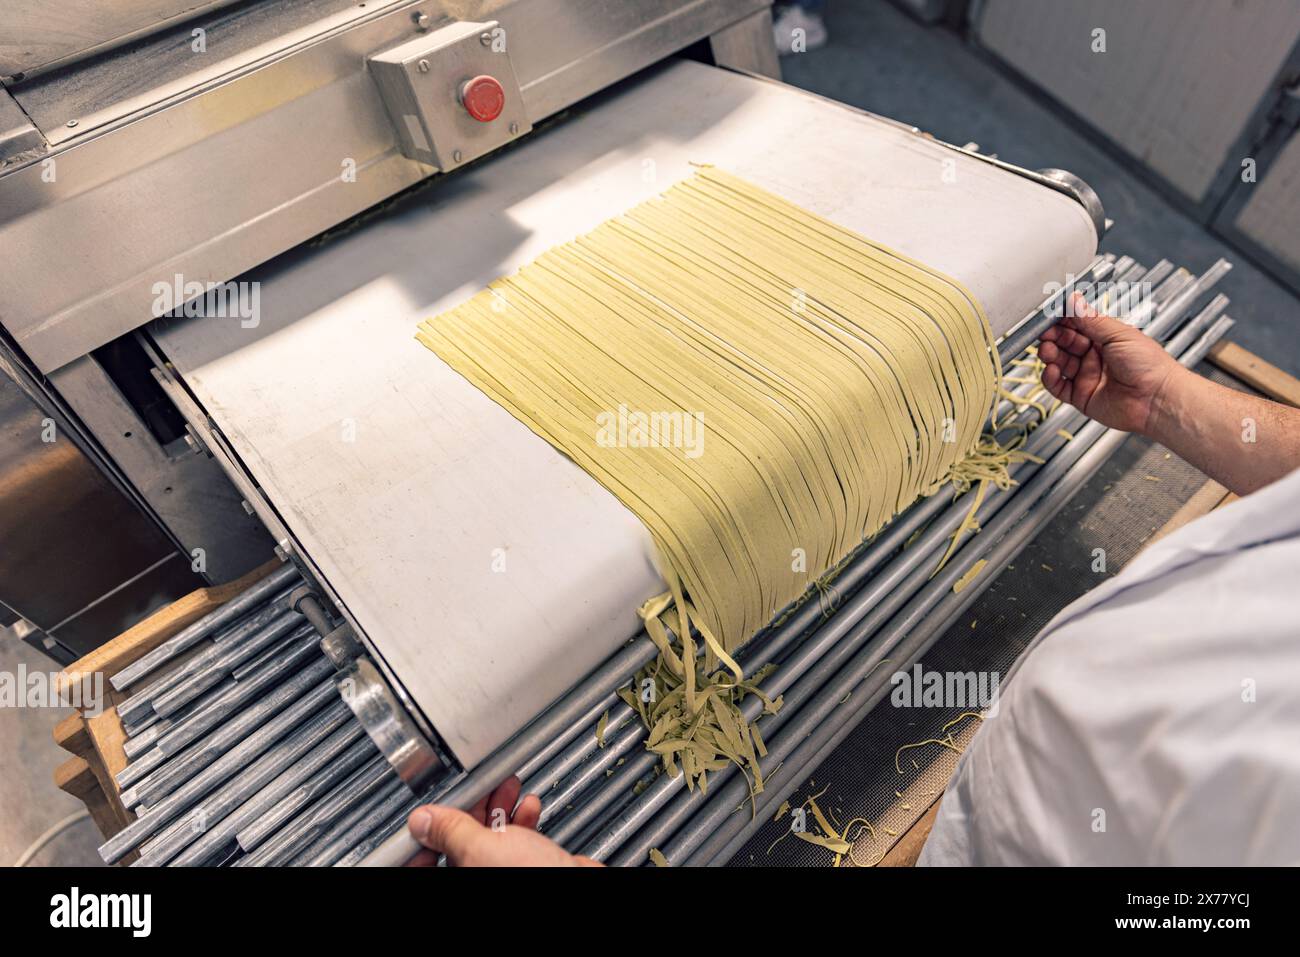 Fresh pasta production at a factory. Industrial pasta machine Stock Photo